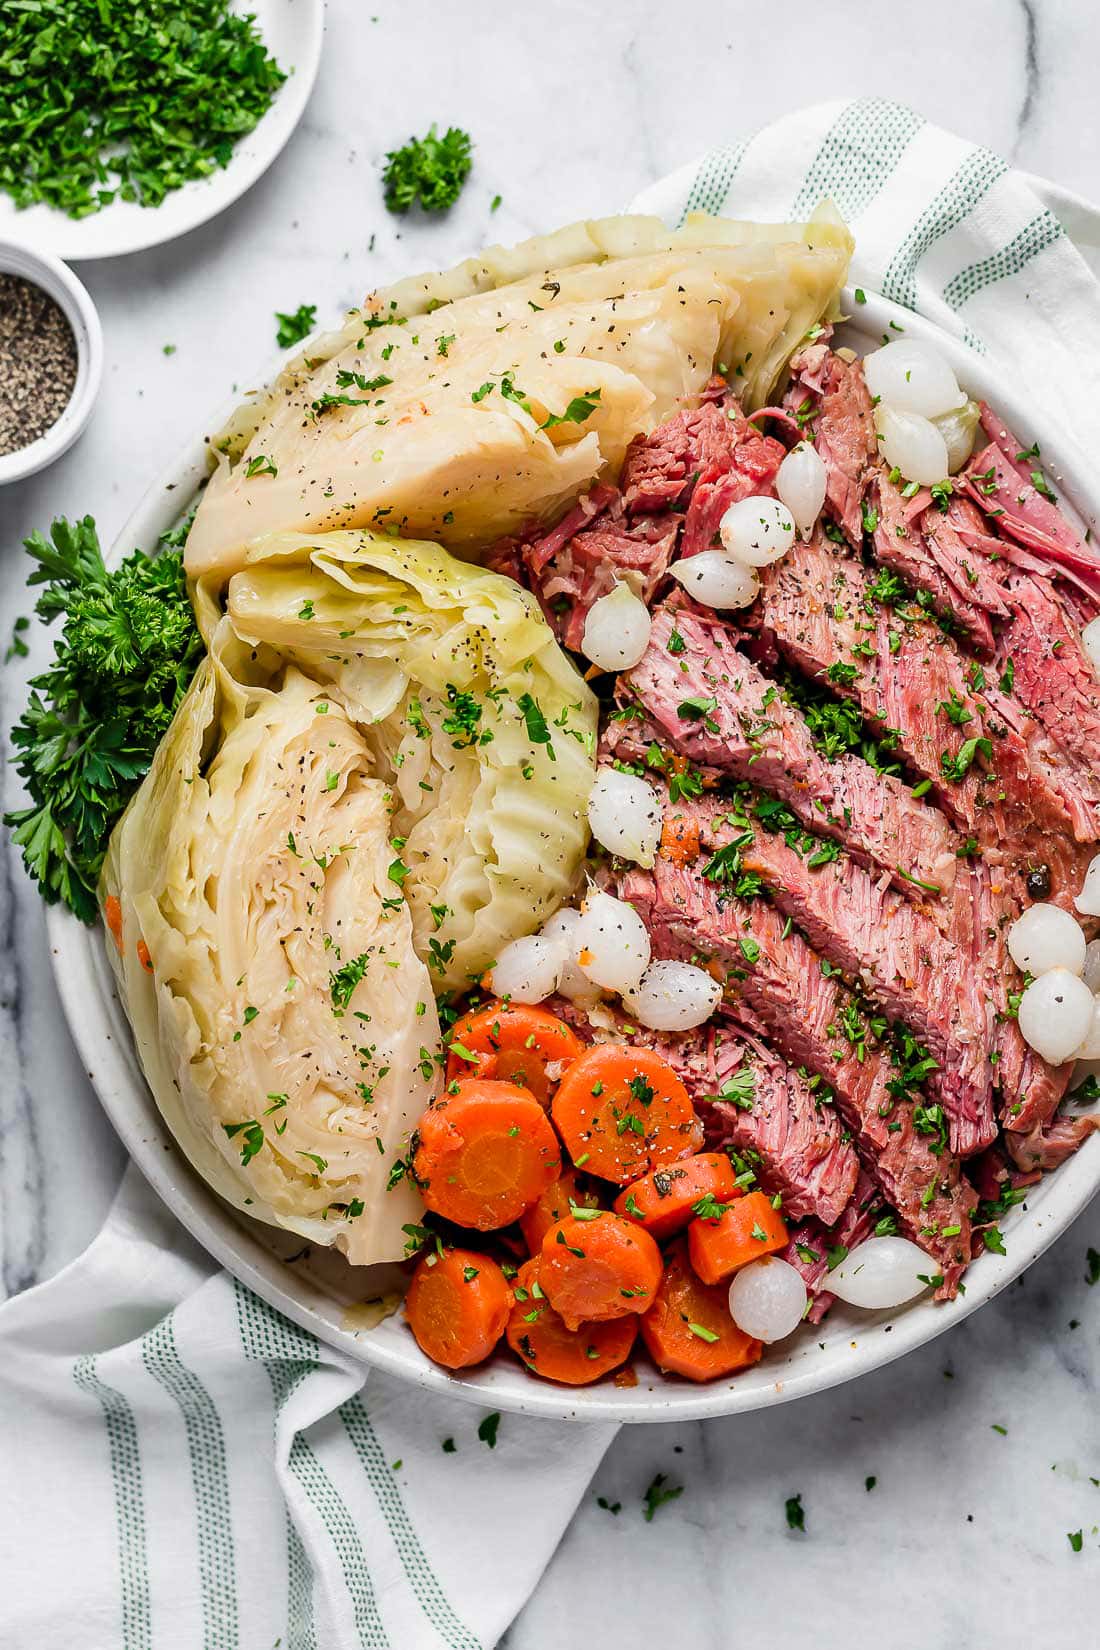 A plate of sliced corned beef and cabbage